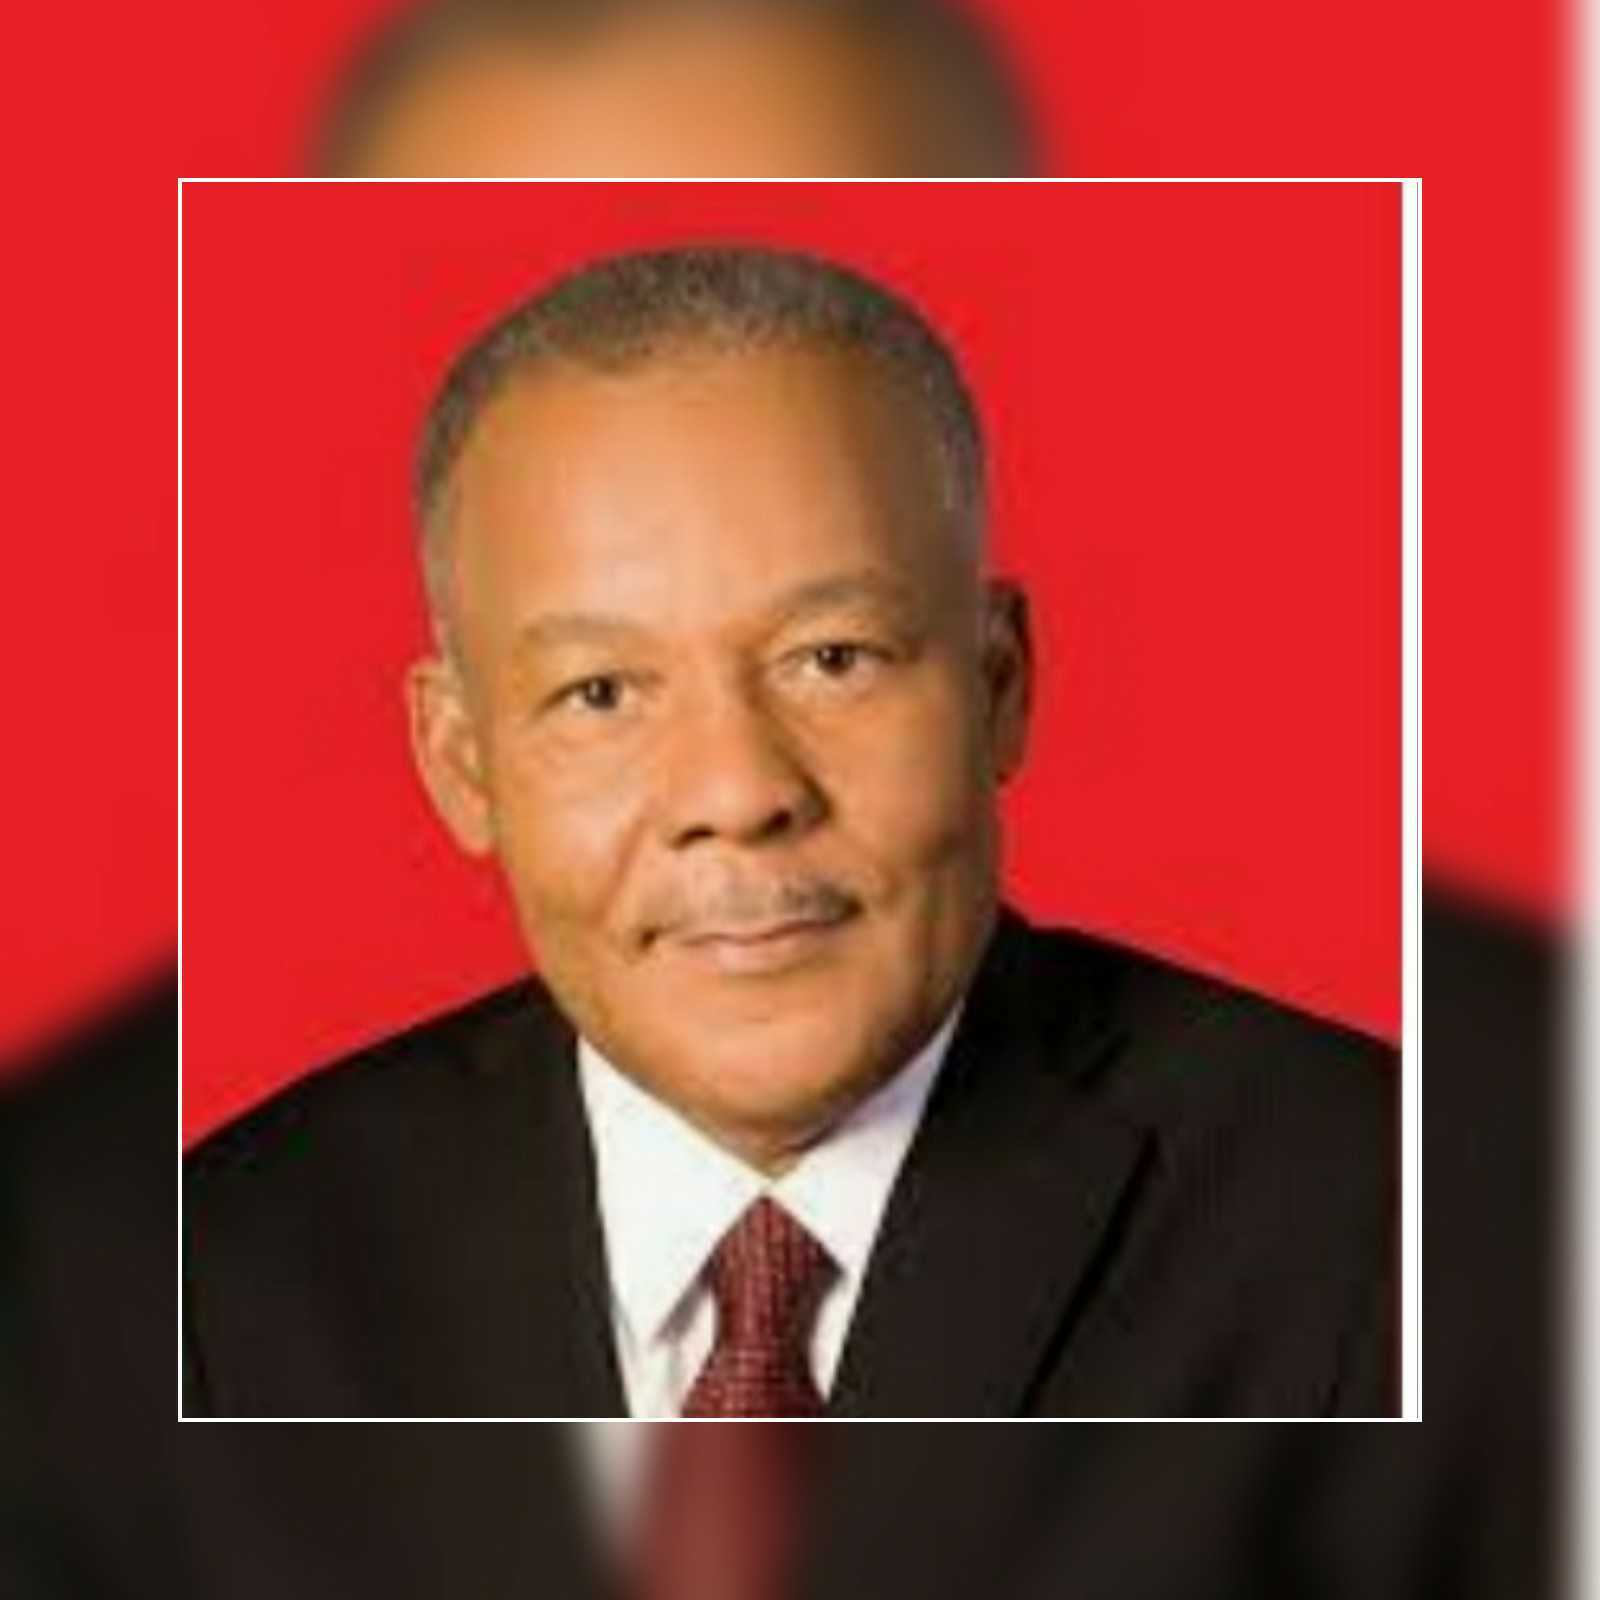  STATEMENT BY THE CARICOM SECRETARY-GENERAL ON THE PASSING OF FORMER BARBADOS PRIME MINISTER OWEN ARTHUR